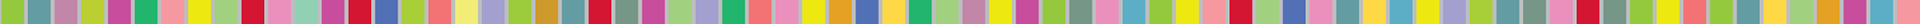 A green and pink background with some white lines